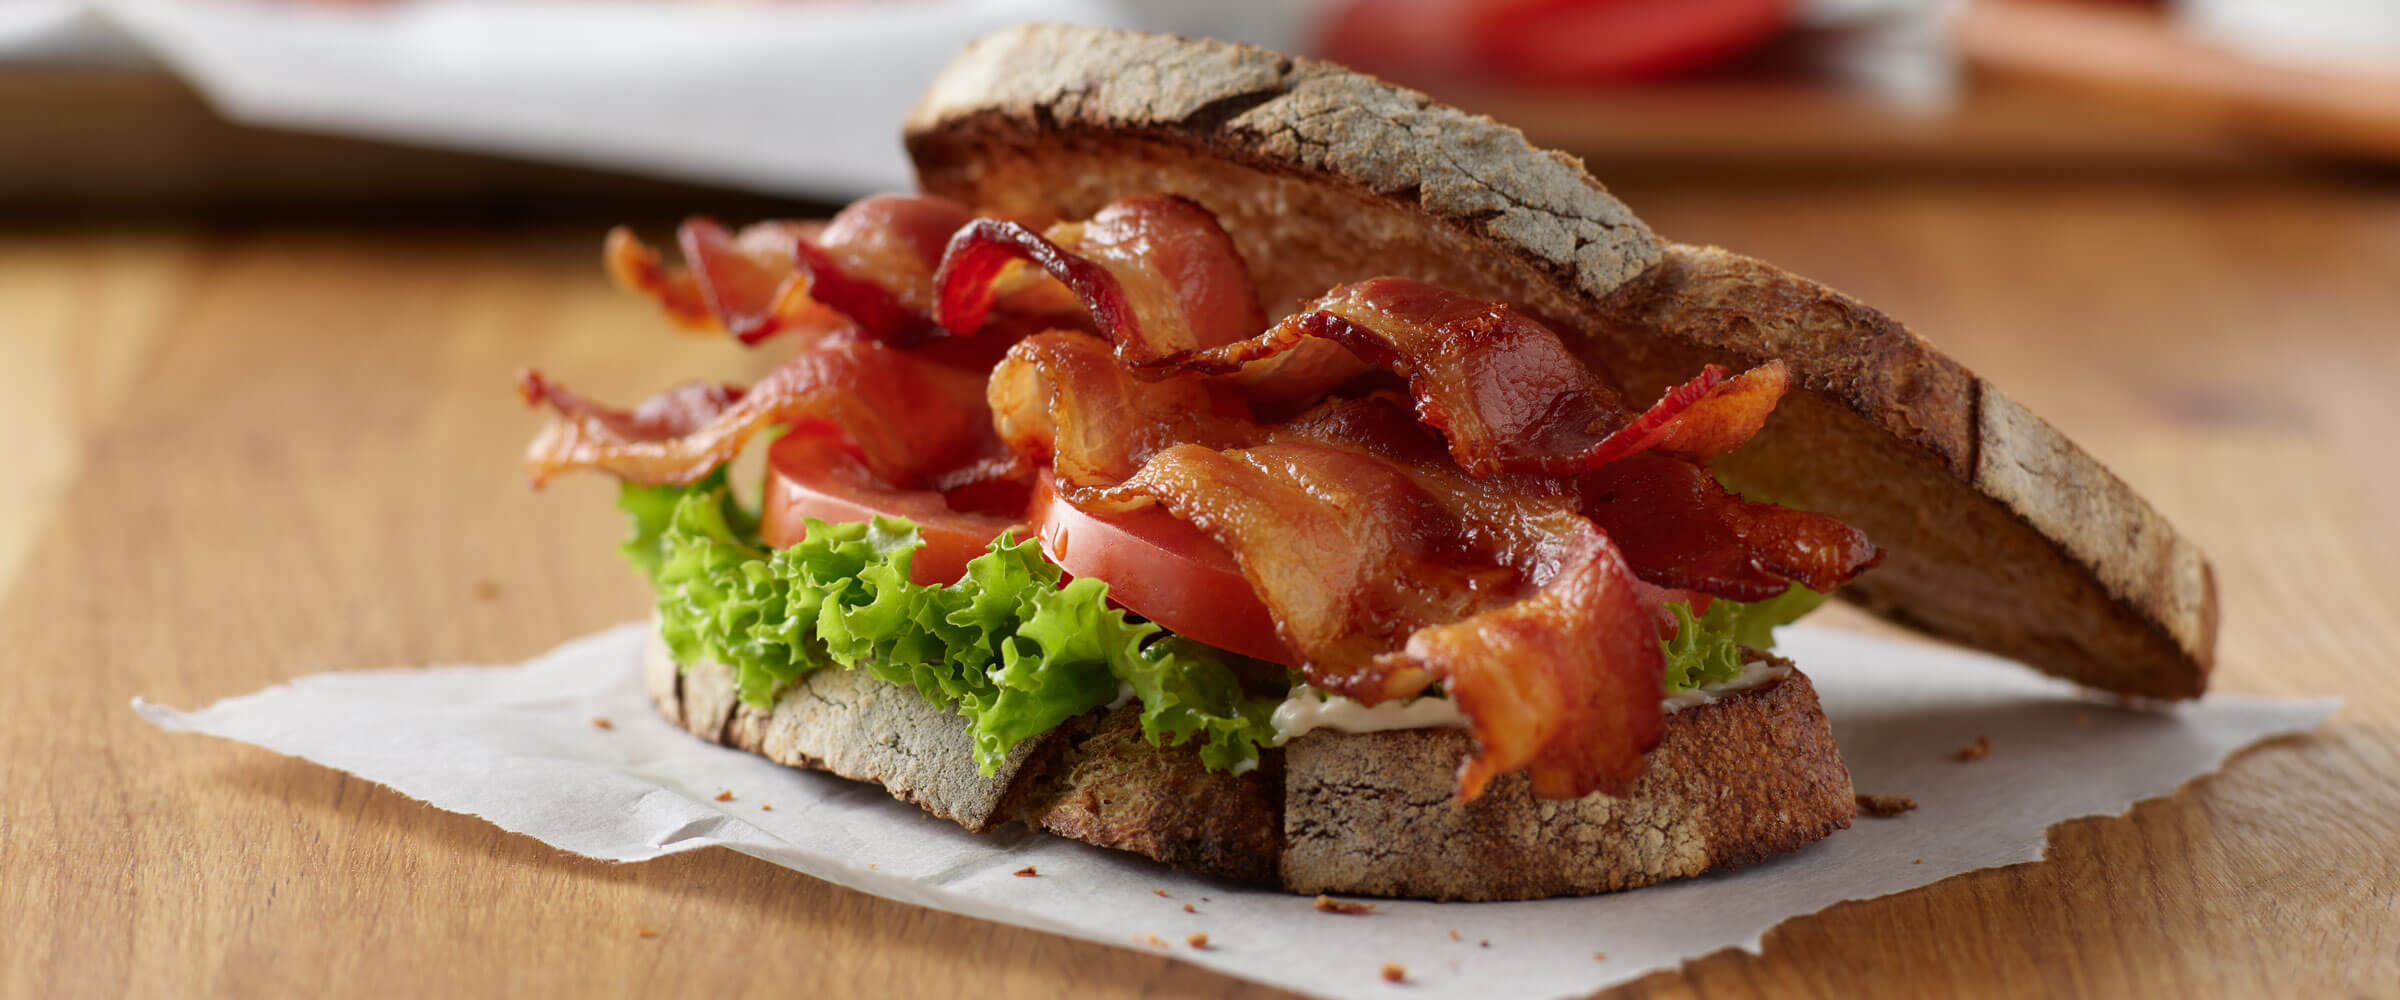 BLT on crusty bread on wooden table